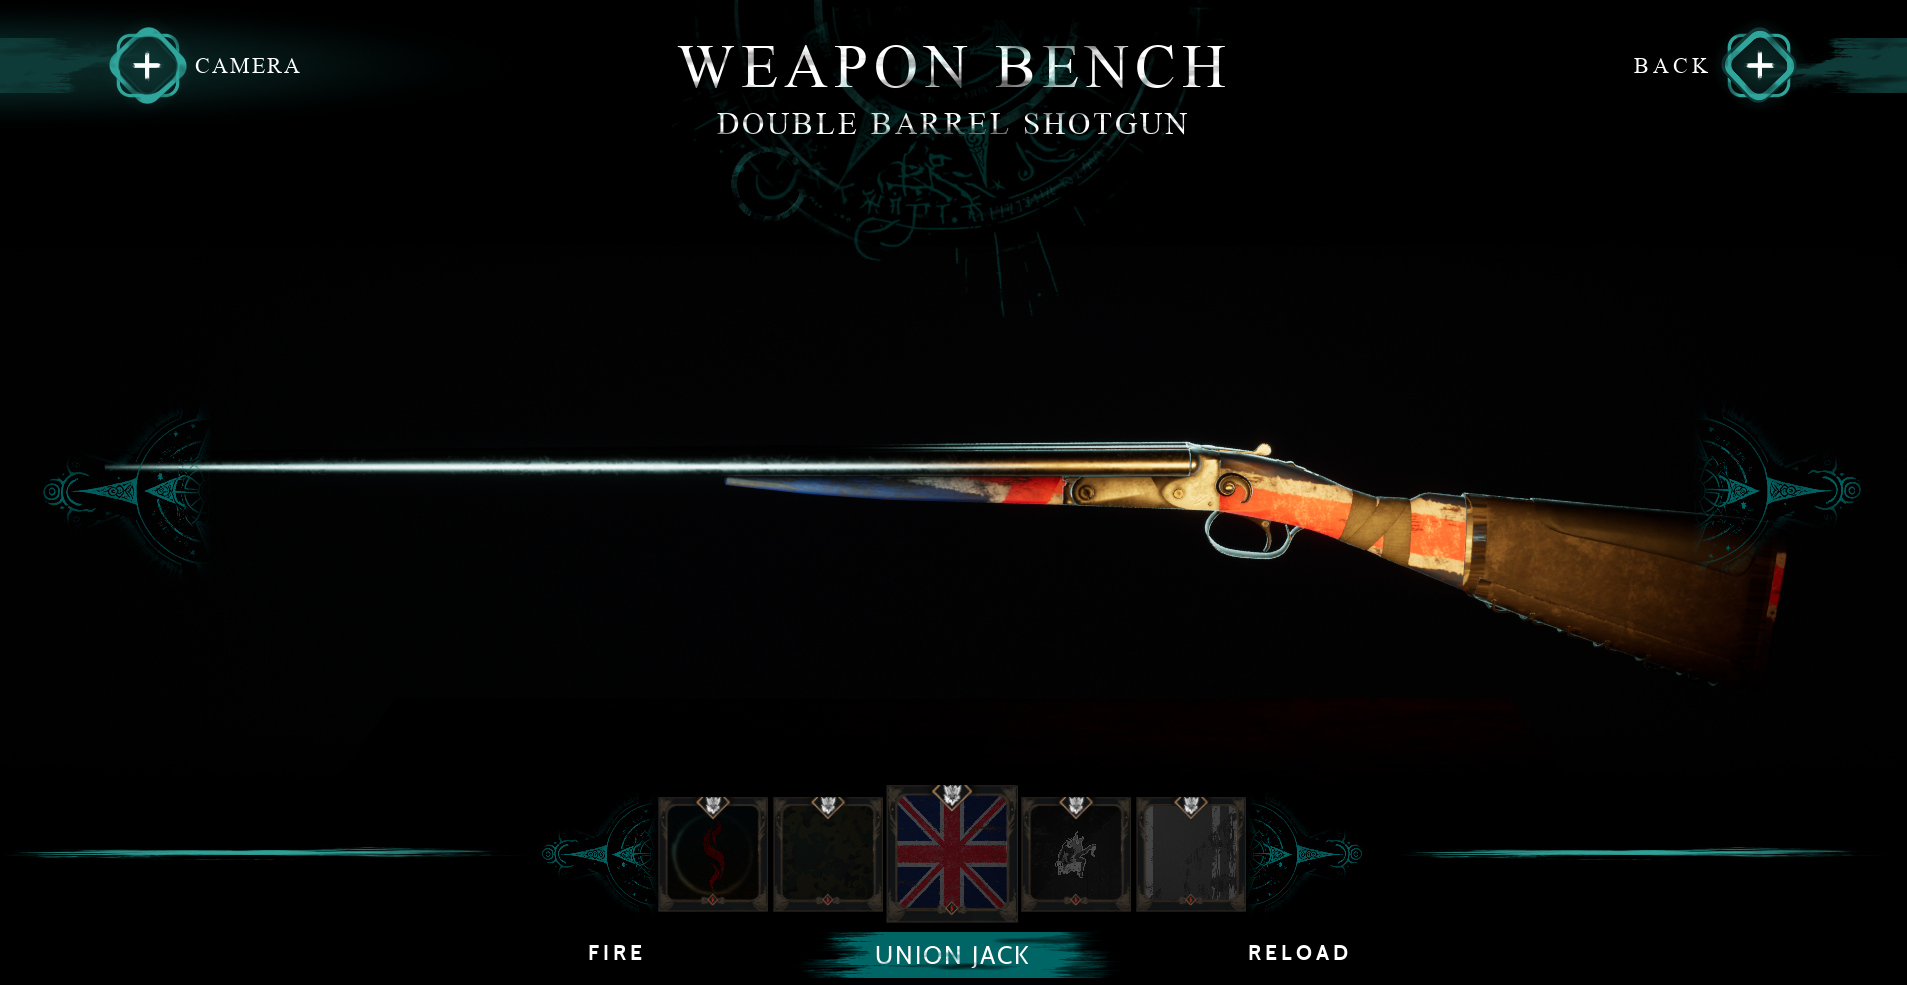 UI screen by Calum Forrester, showing the weapon skin selection screen form The Bornless, a game by Cathedral Studios